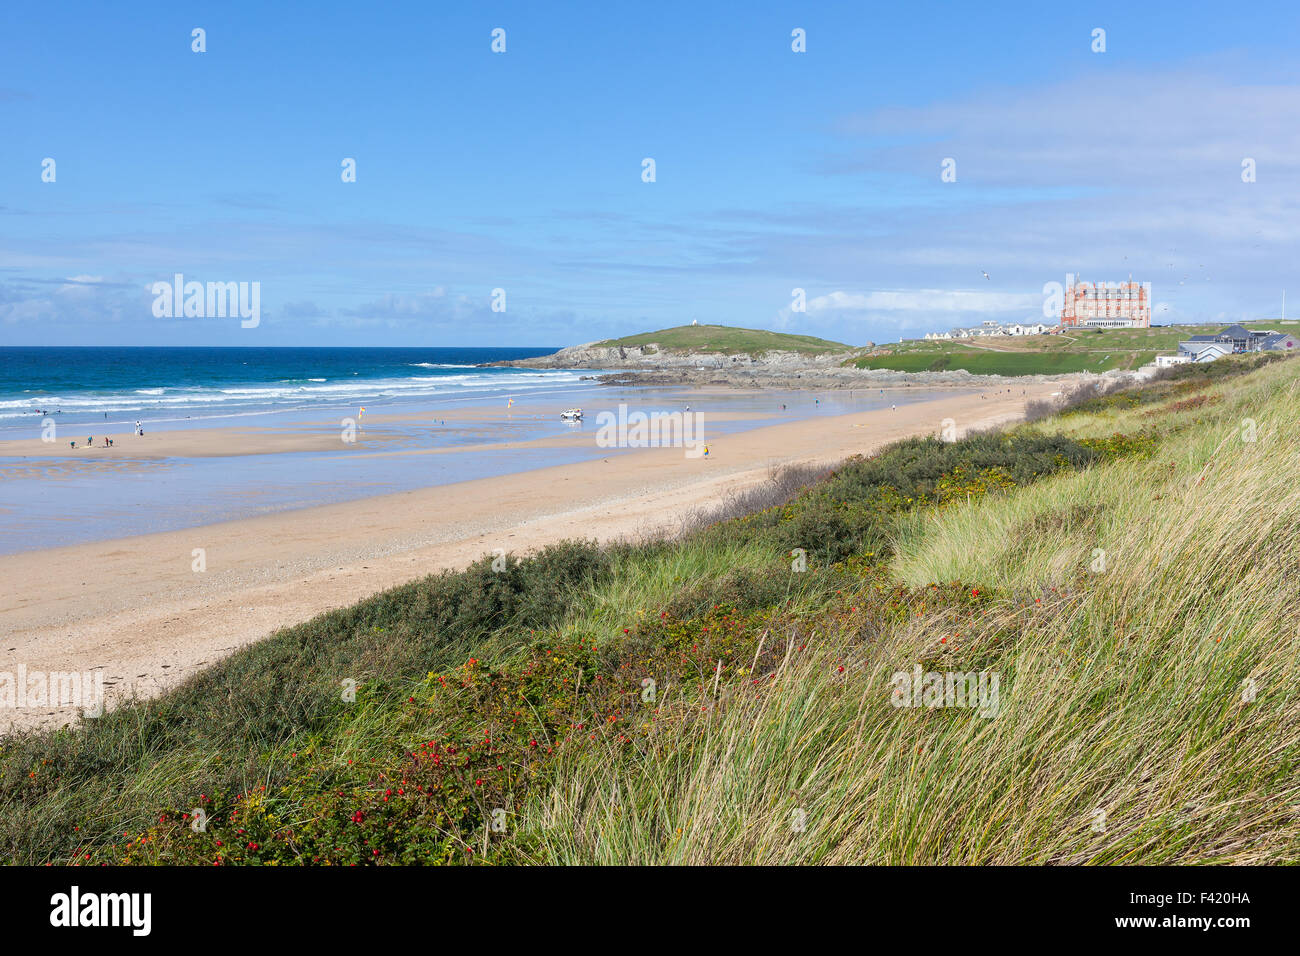 Wide view of Fistral Beach in Newquay, Cornwall viewed from the grassy dunes on a clear, sunny day. Stock Photo